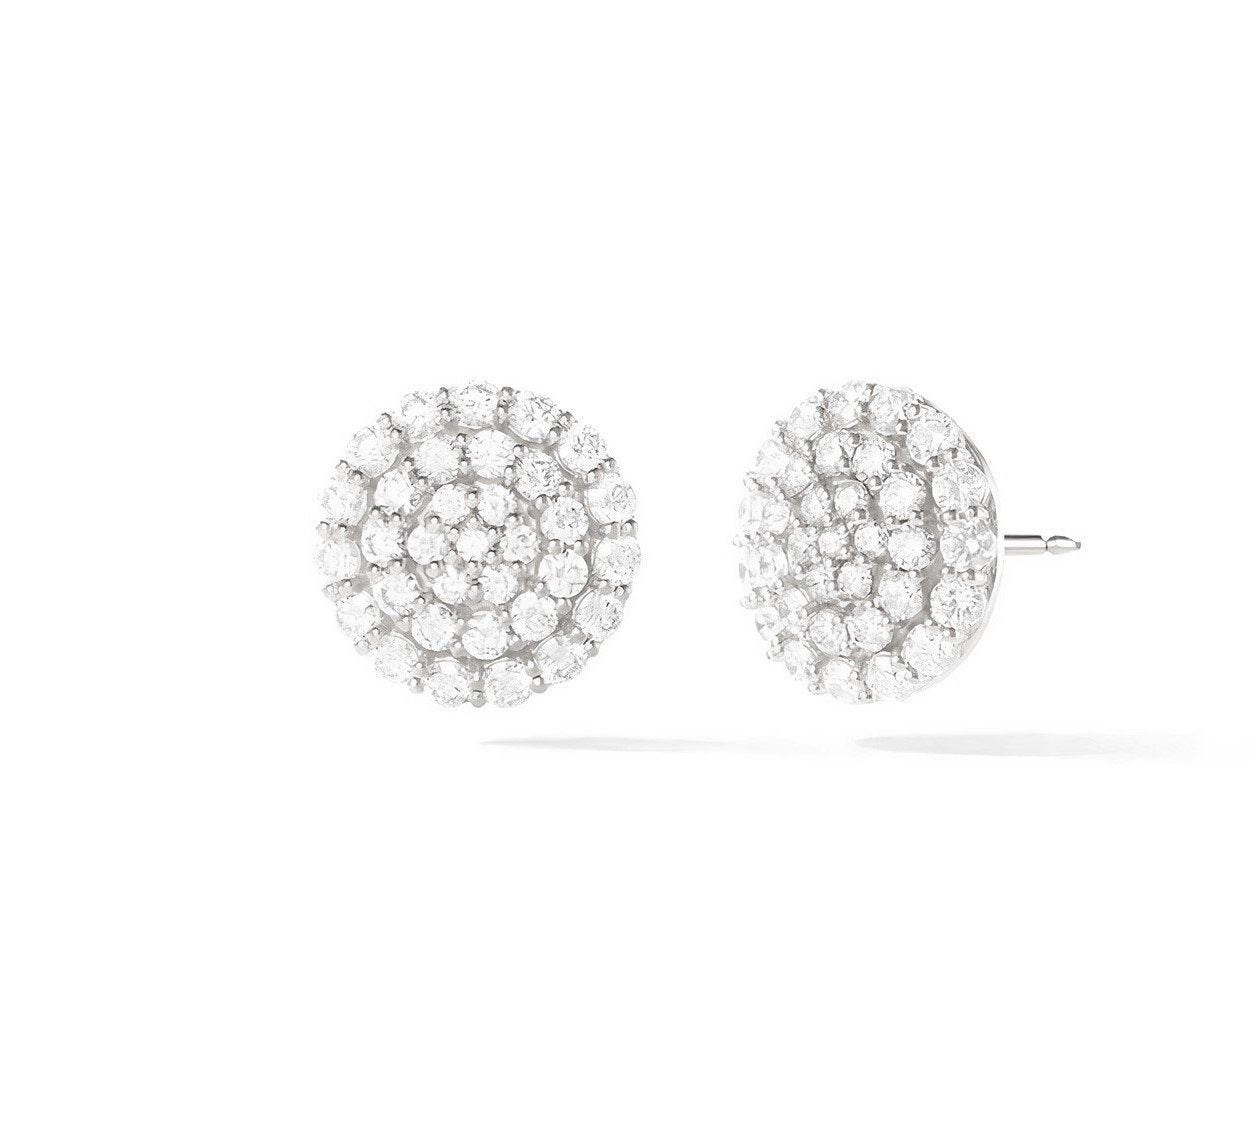 Fiji Tiny Button Diamond Stud Earrings in Sterling Silver and Diamond   Jewellery by Monica Vinader